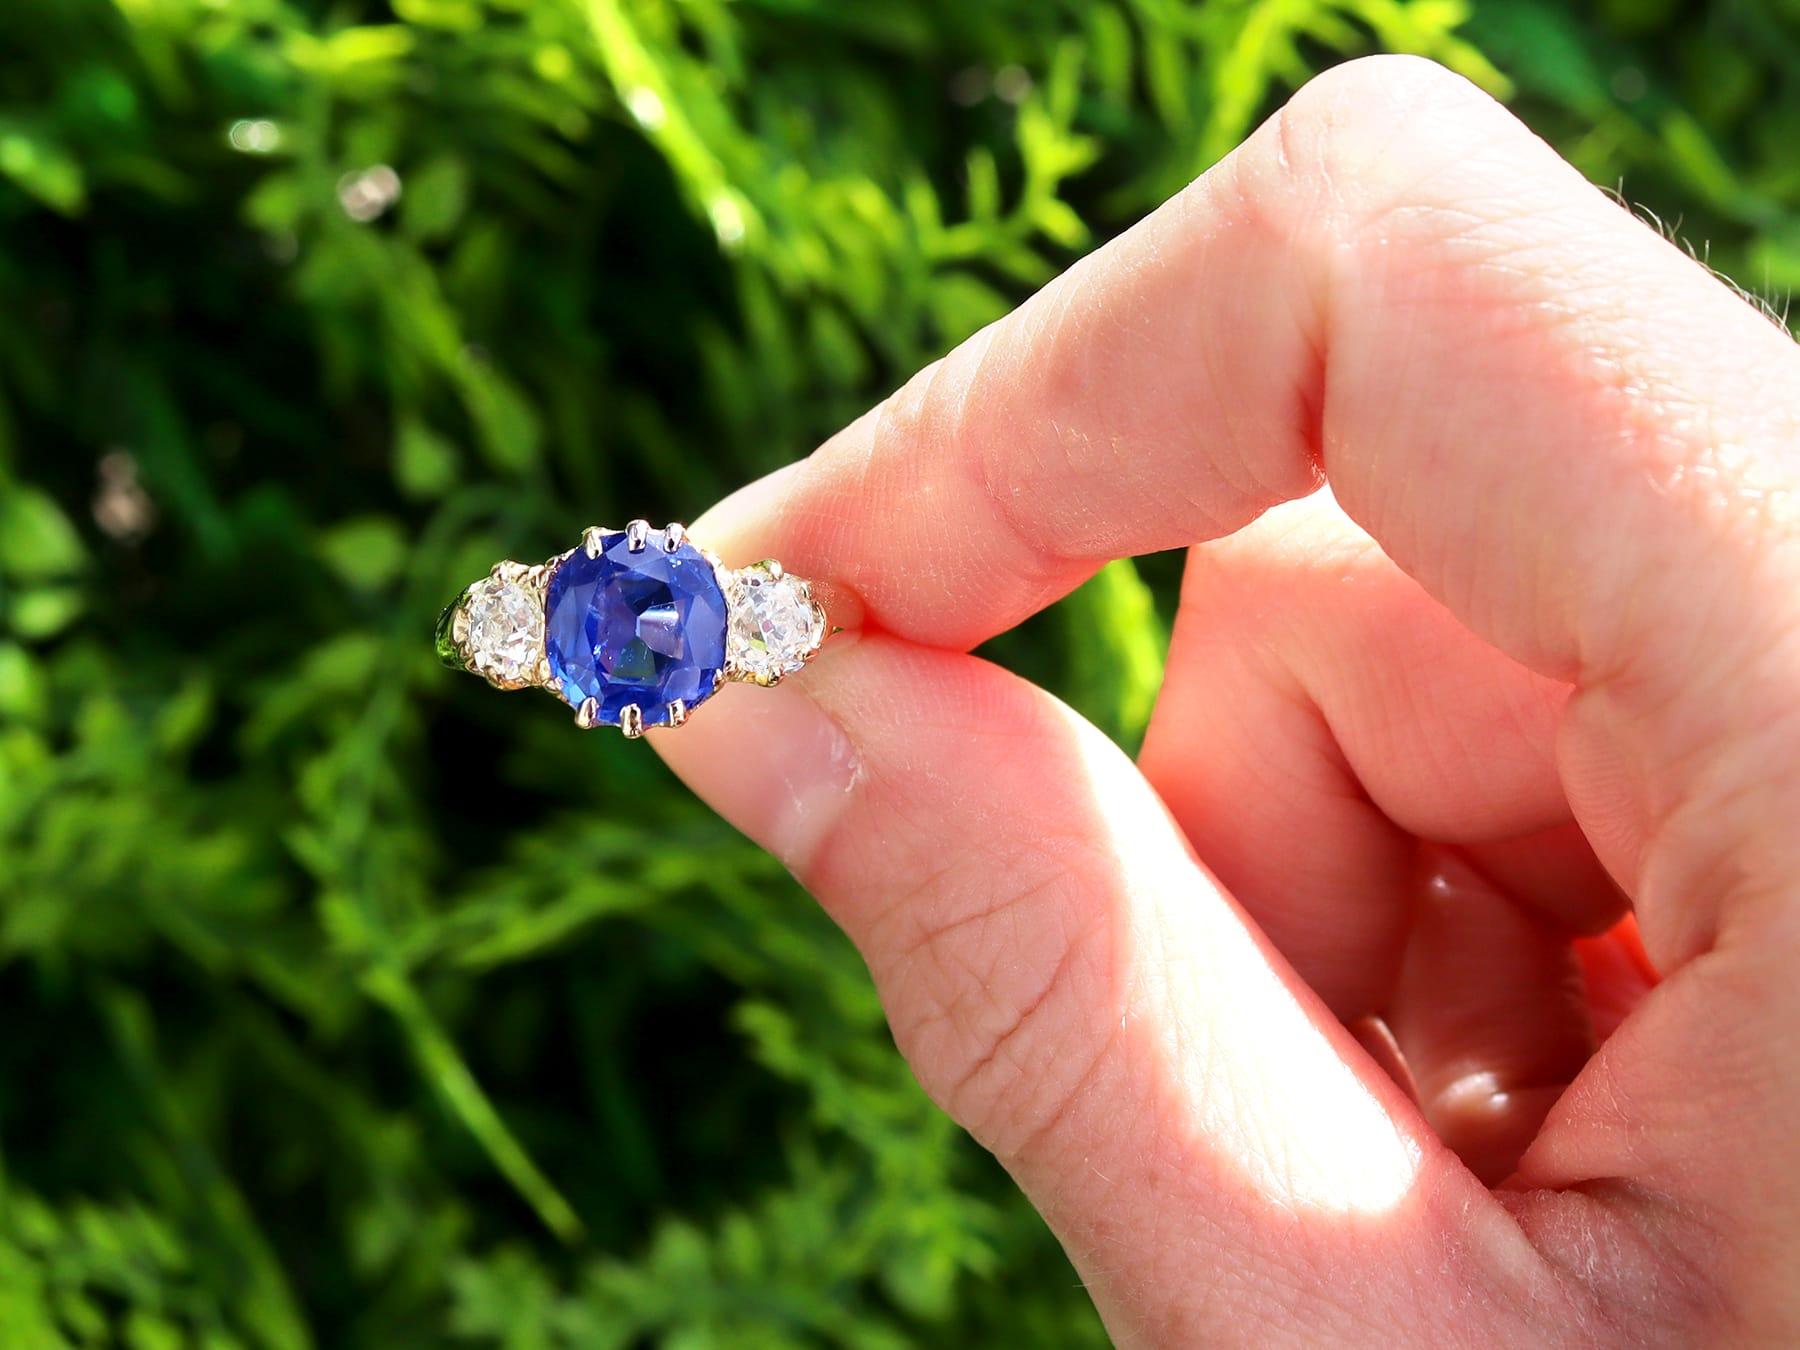 A stunning, fine and impressive antique 2.84 carat Ceylon sapphire and 1.04 carat diamond, 18 karat yellow gold trilogy ring; part of our diverse sapphire ring collections.

This stunning, fine and impressive antique sapphire ring has been crafted